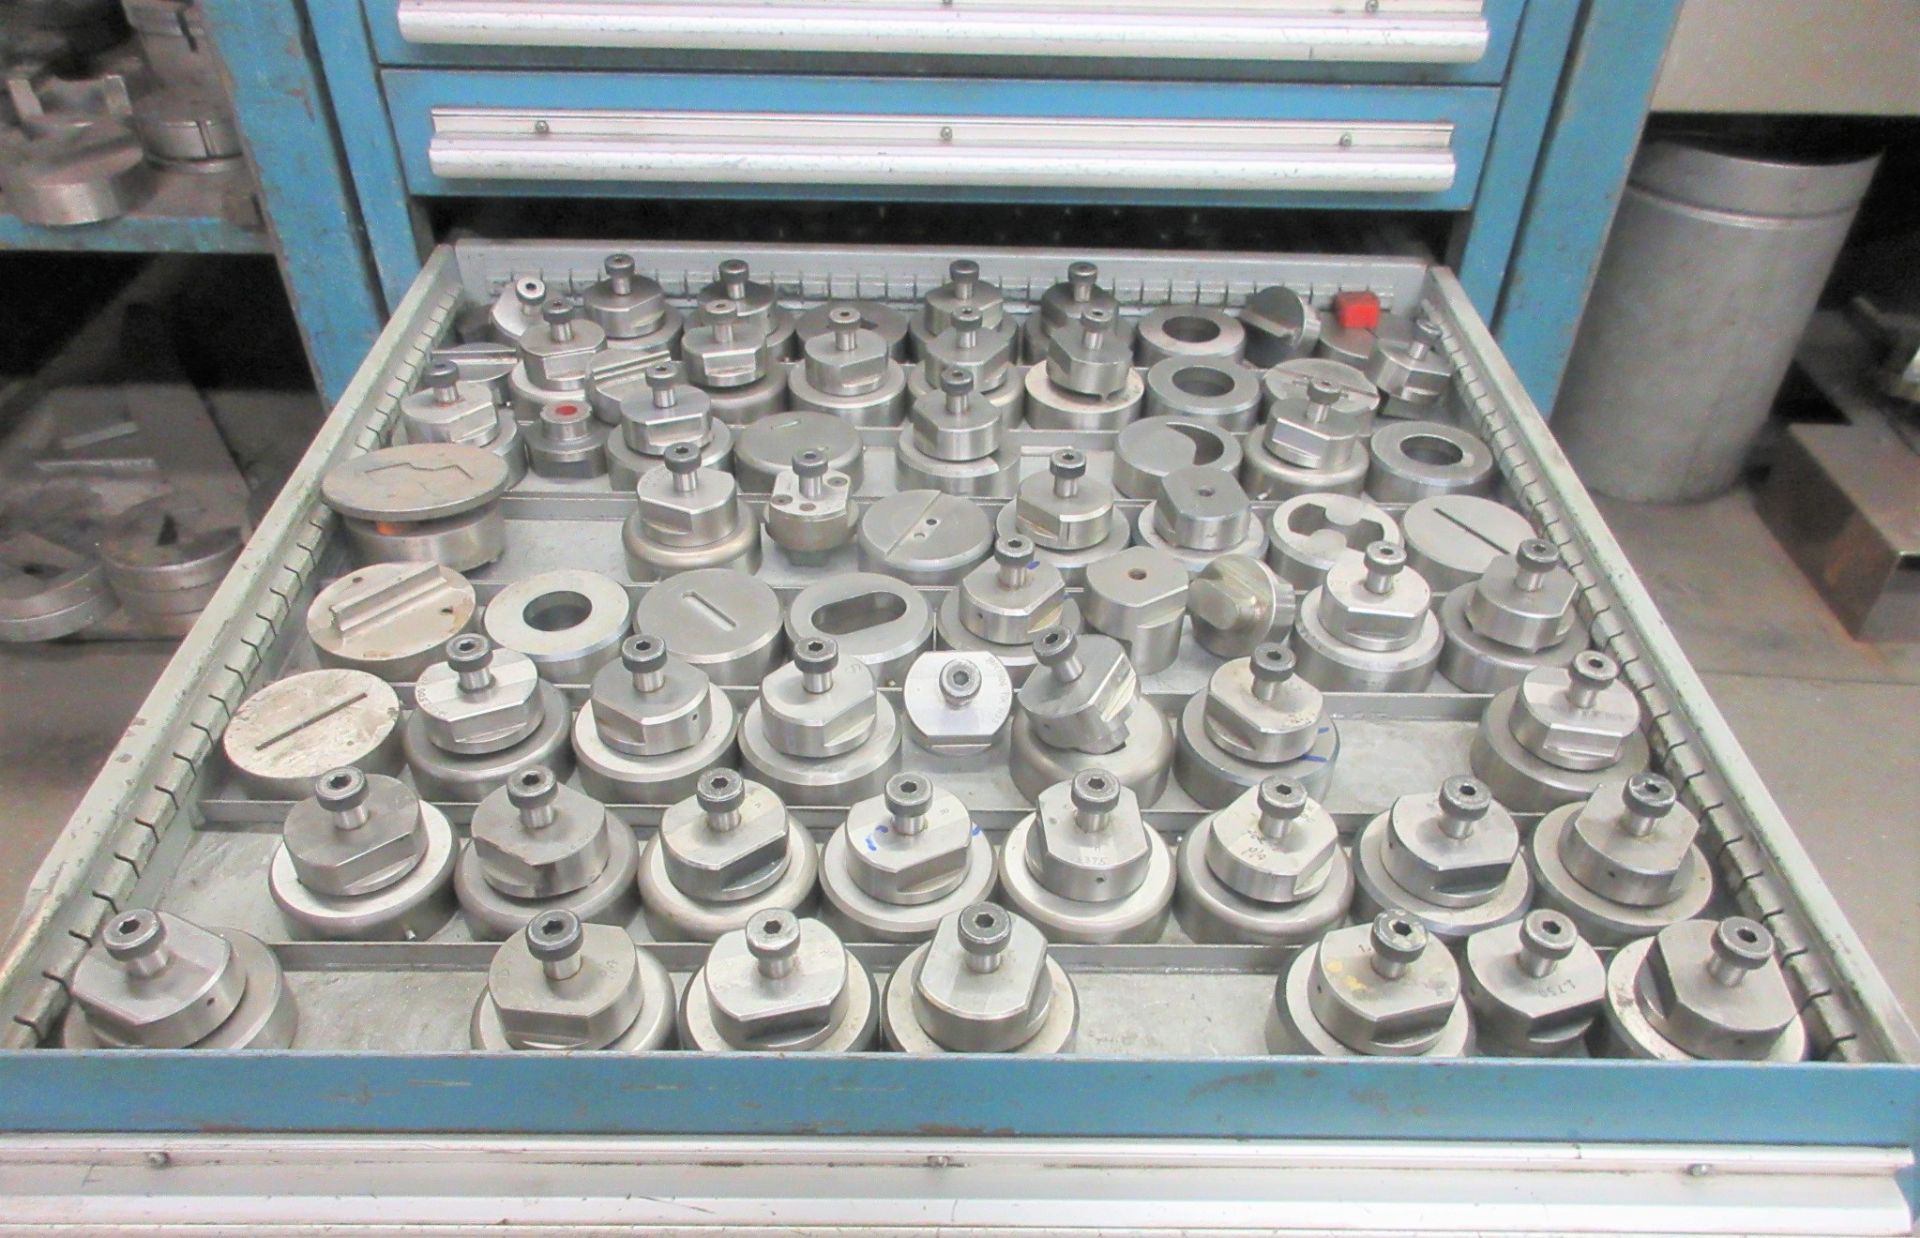 PIERCE-ALL 50-TON CAP. PERF-O-MATOR 3055 PUNCH, S/N 7812326 W/ LARGE ASSORTMENT OF PUNCH DIES - Image 32 of 40